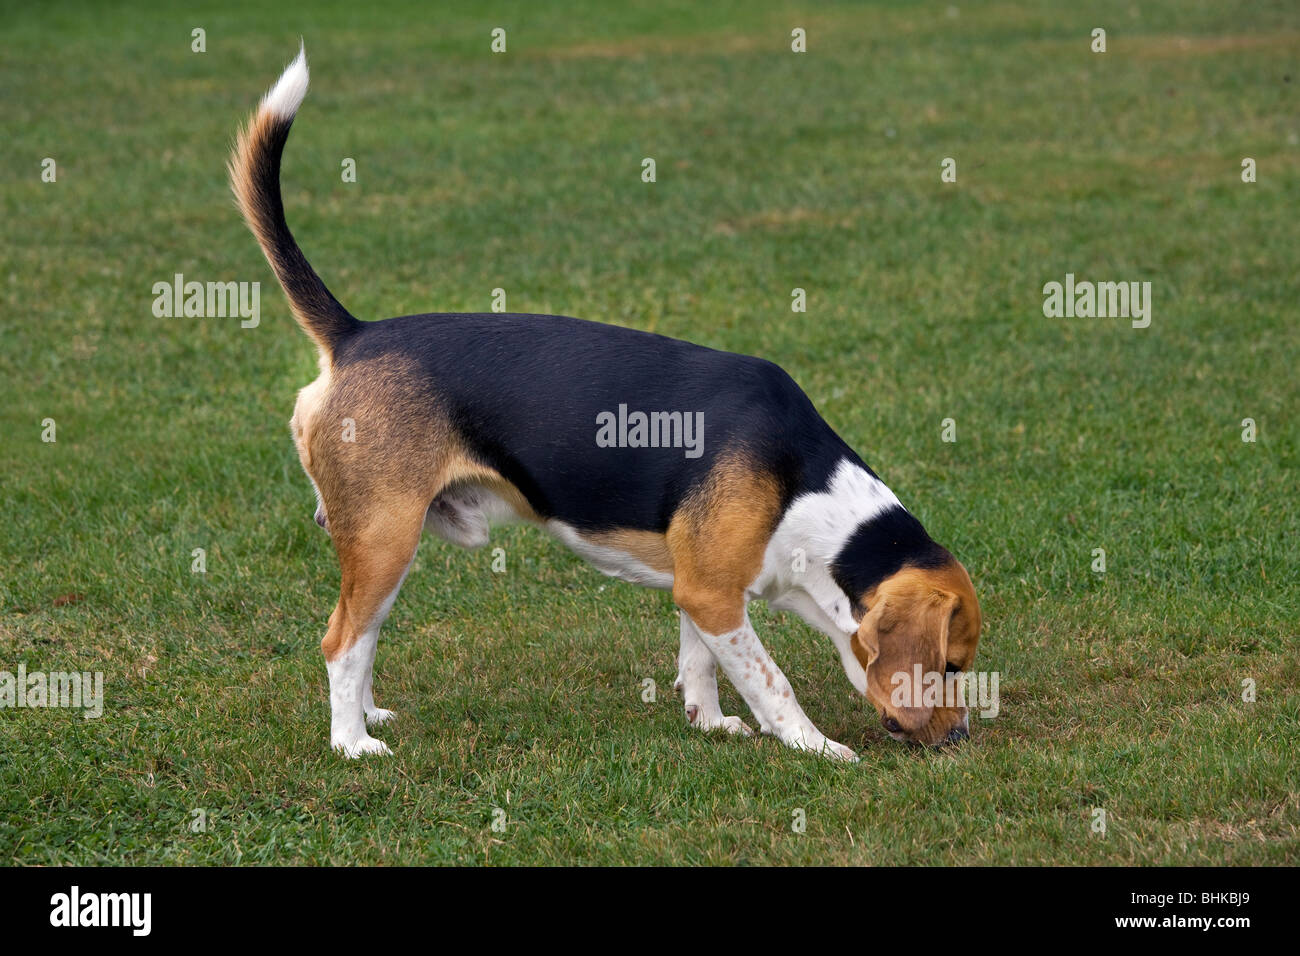 Chien Beagle (Canis lupus familiaris) sniffing in garden Banque D'Images